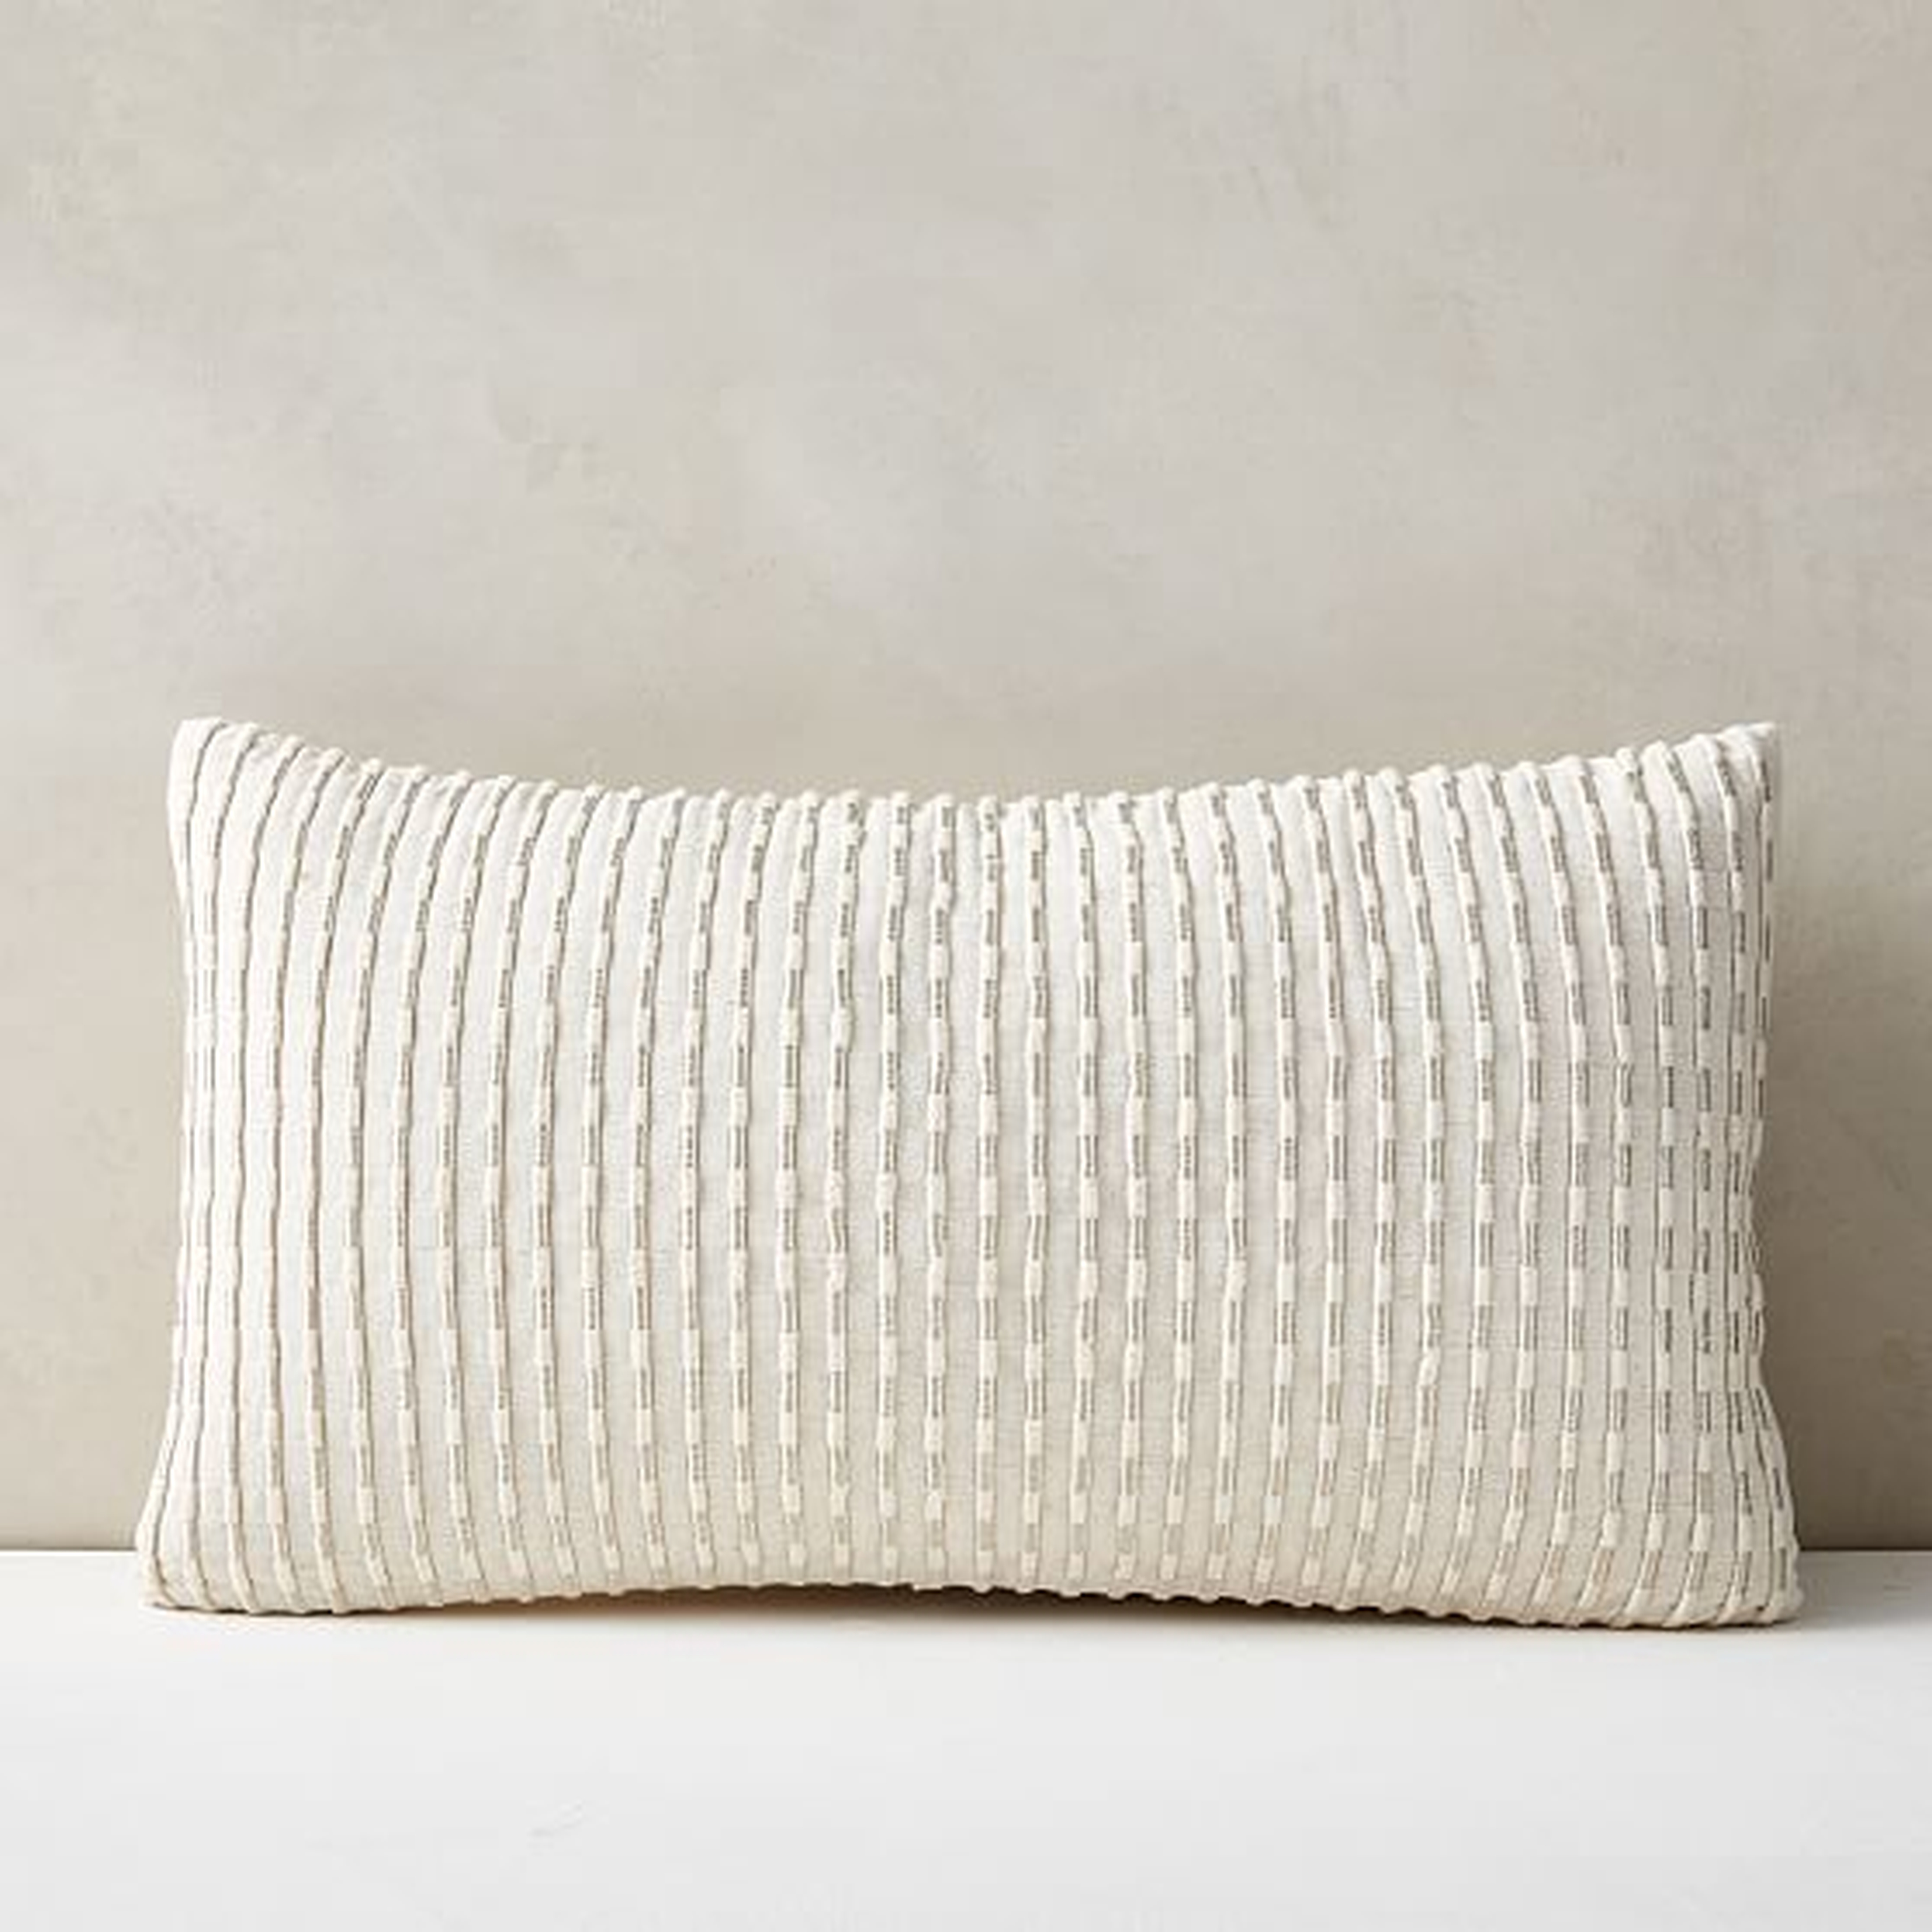 Corded Metallic Pillow Cover, 12"x21", Natural - West Elm